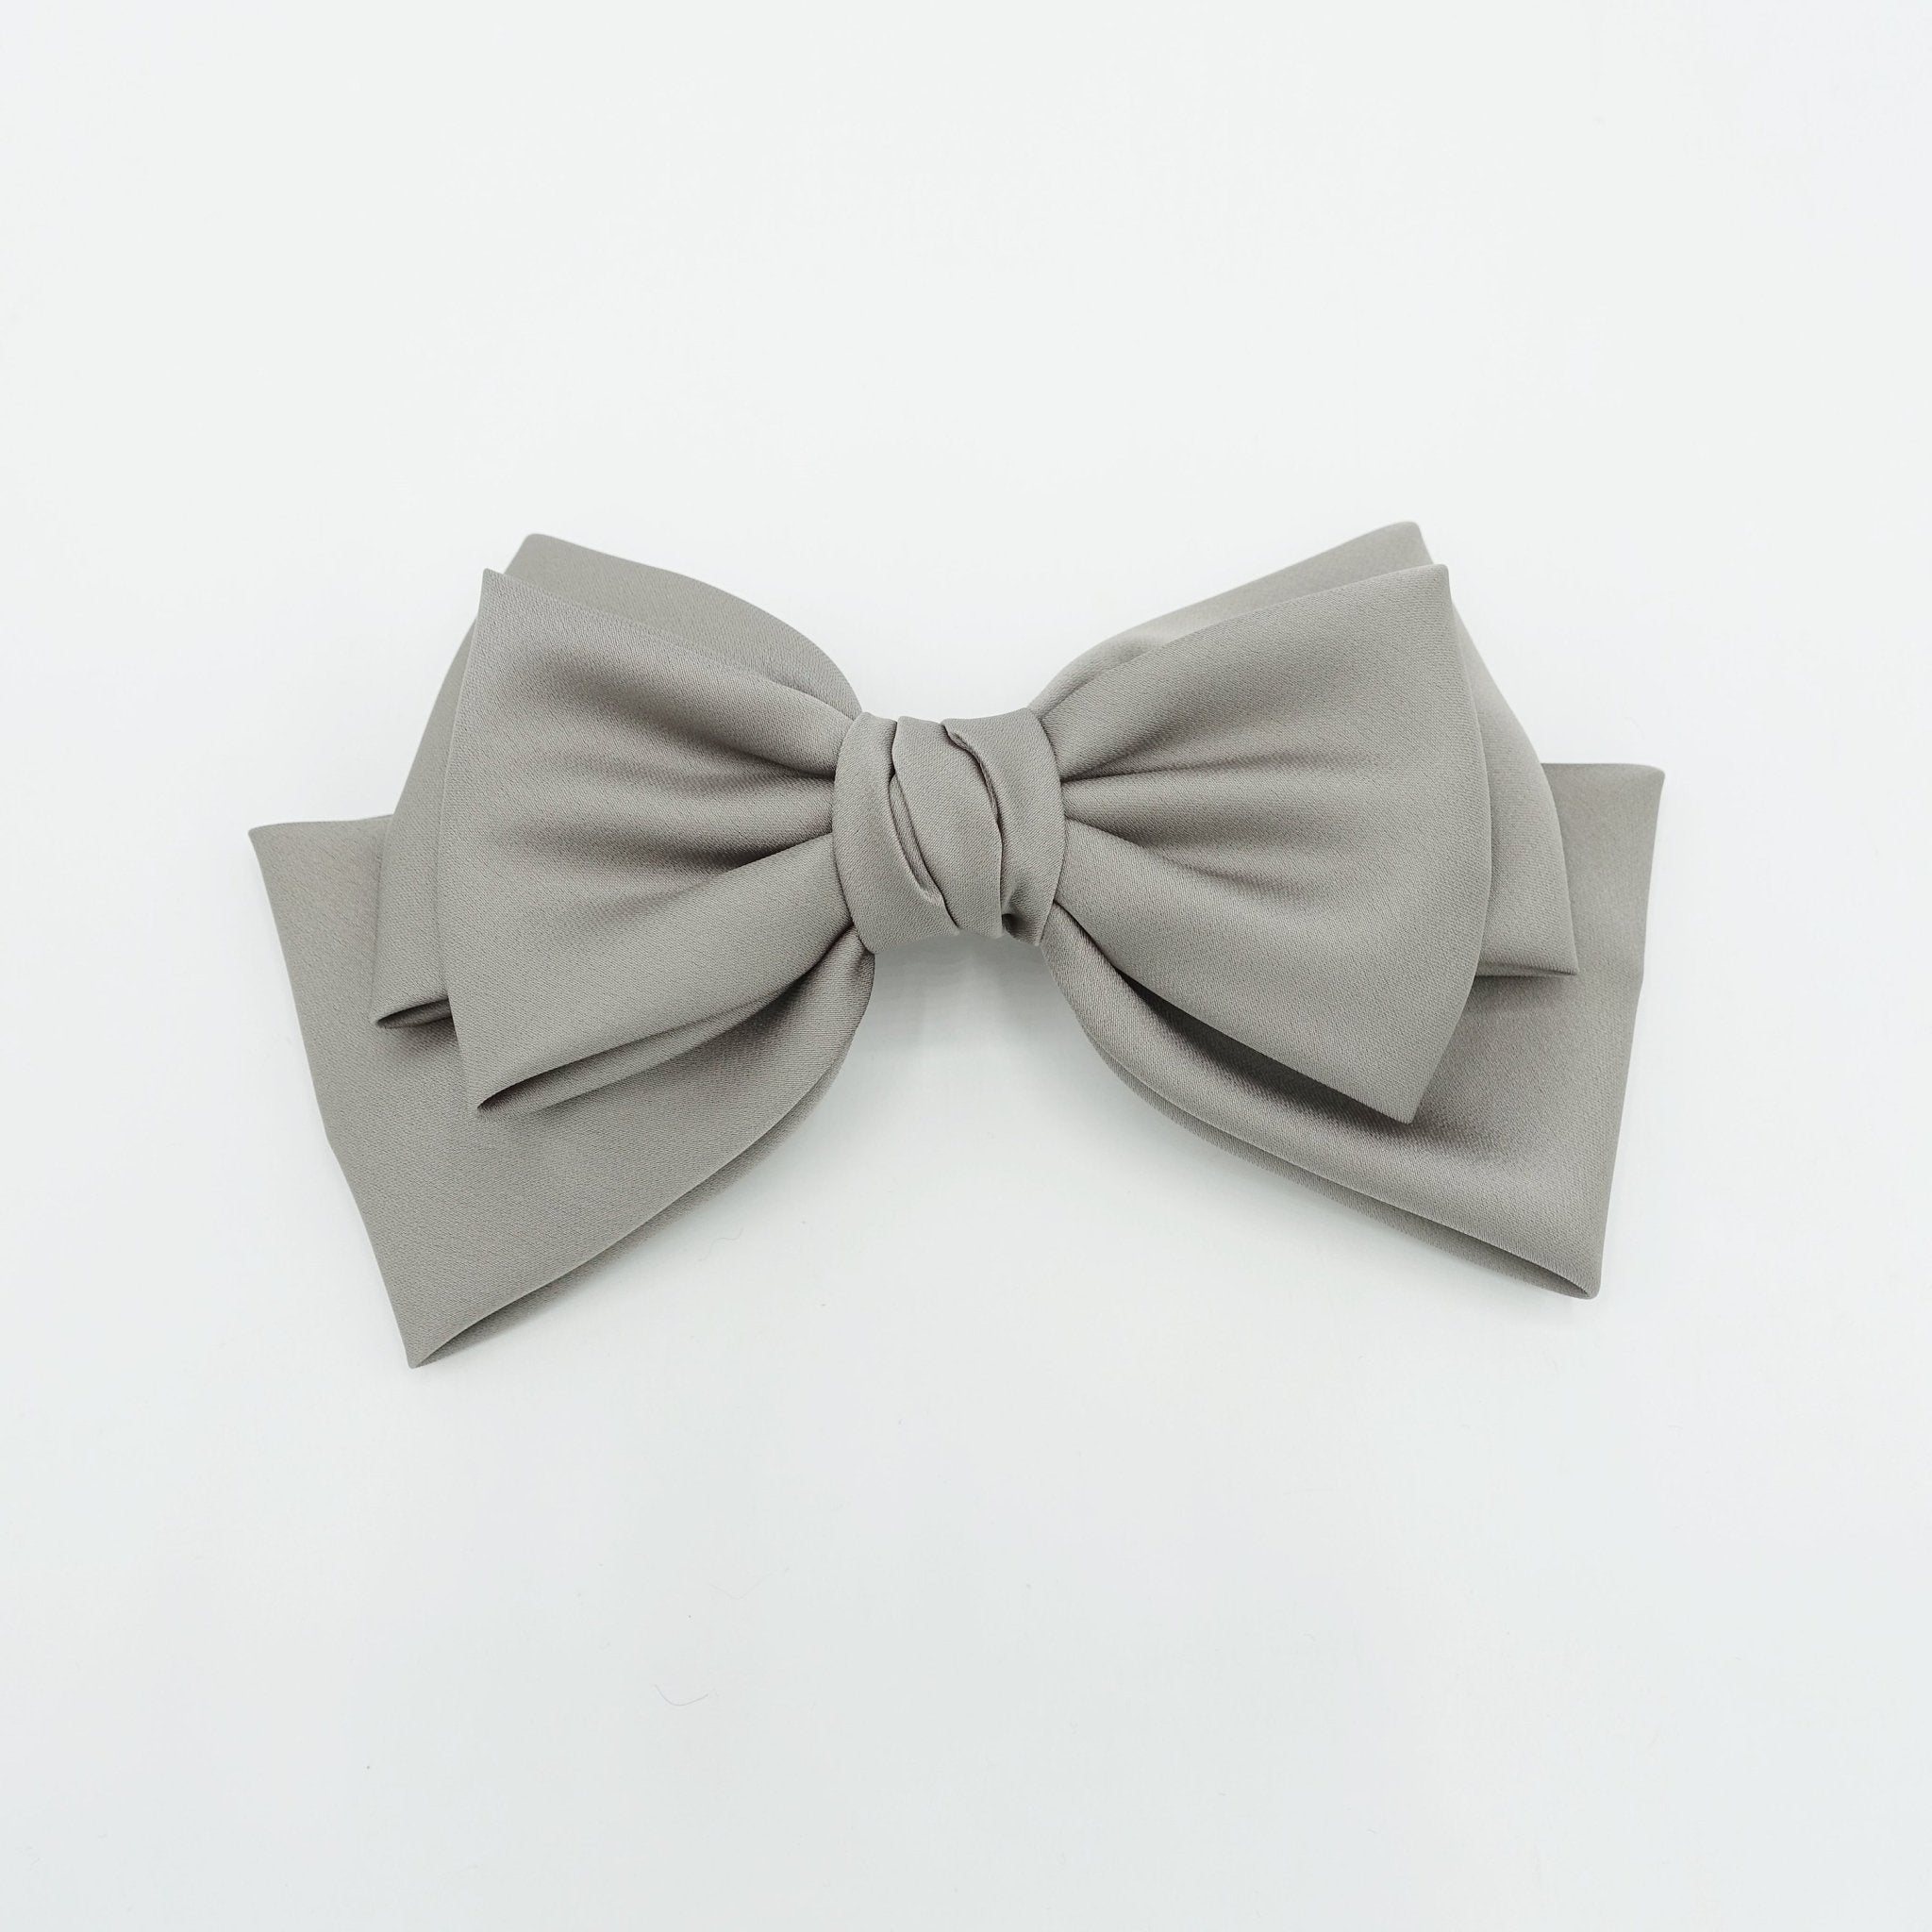 veryshine.com Barrettes & Clips Gray triple satin hair bow moderate style hair accessory for women